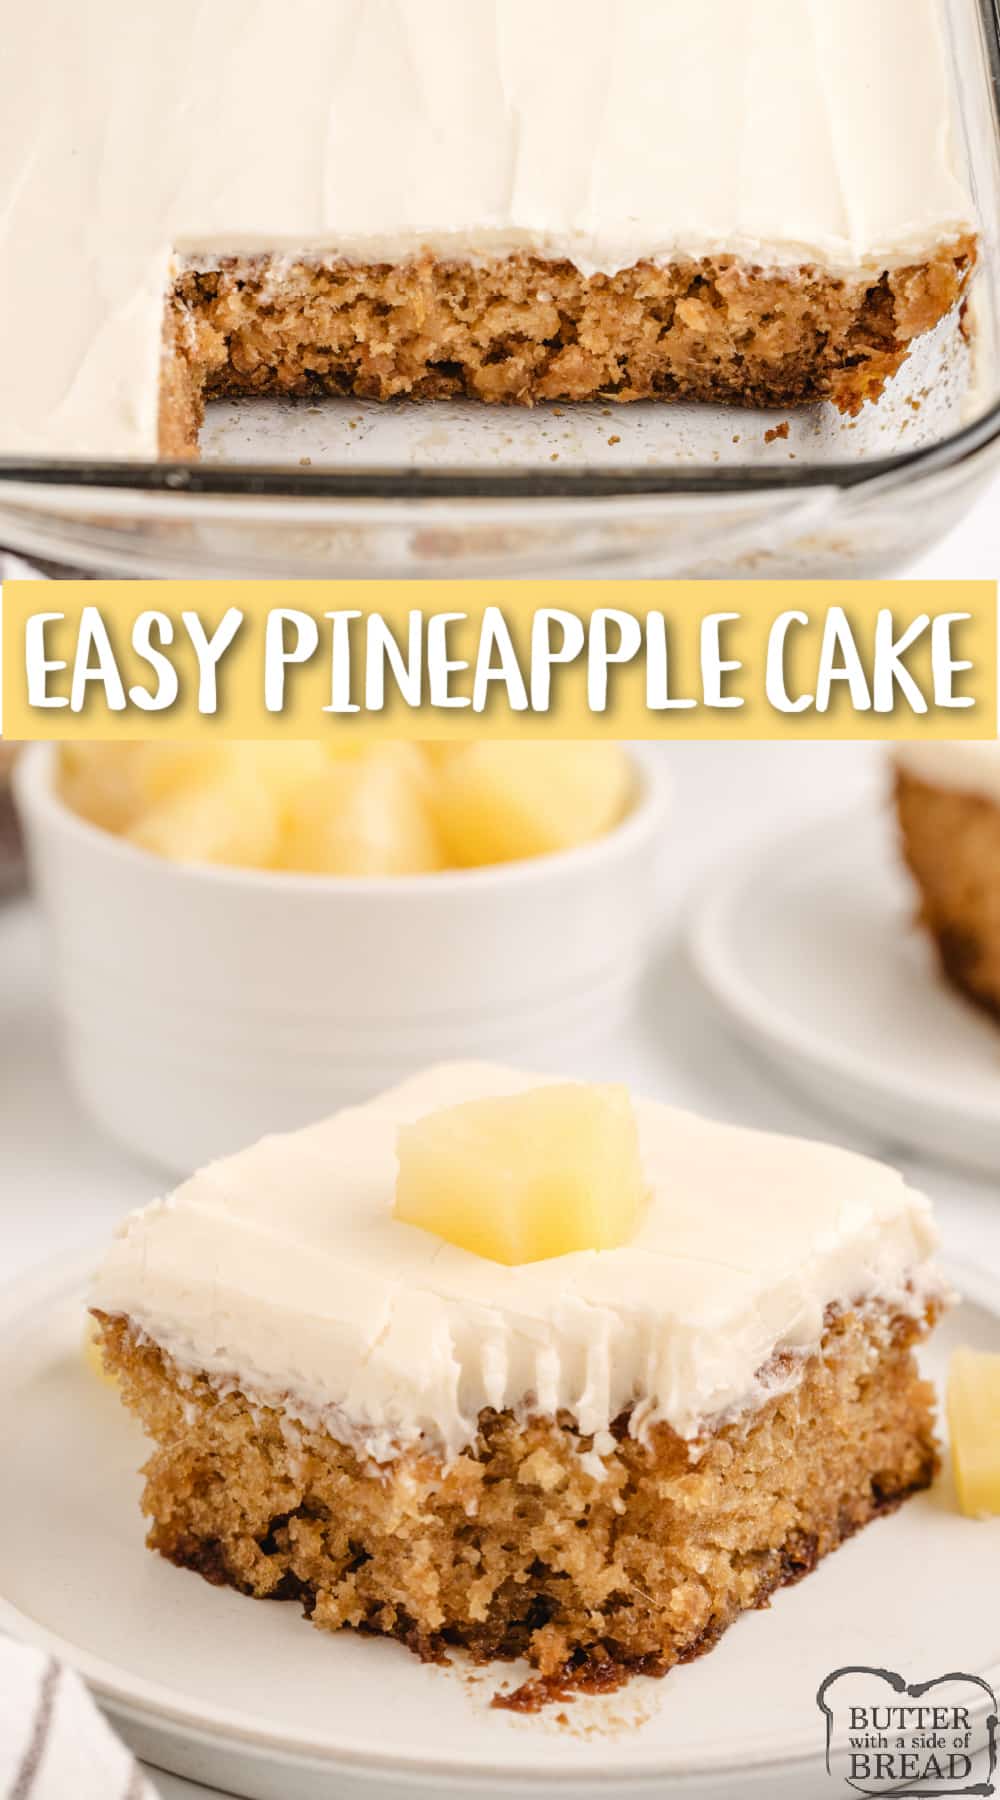 Easy Pineapple Cake made from scratch with crushed pineapple, then topped with a simple cream cheese frosting. This easy cake recipe is perfectly moist and full of flavor!